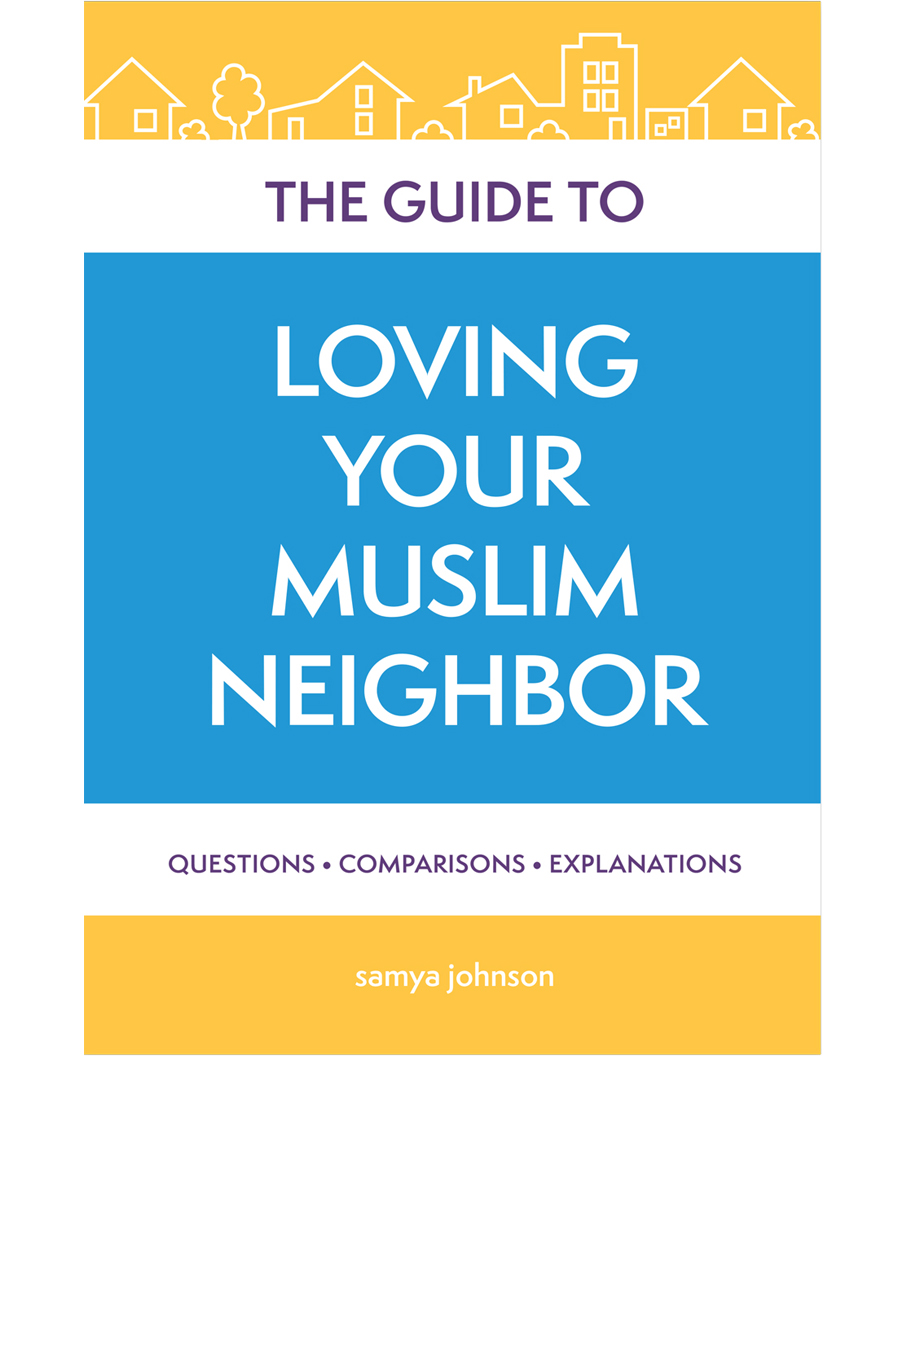 The Guide to Loving Your Muslim Neighbor